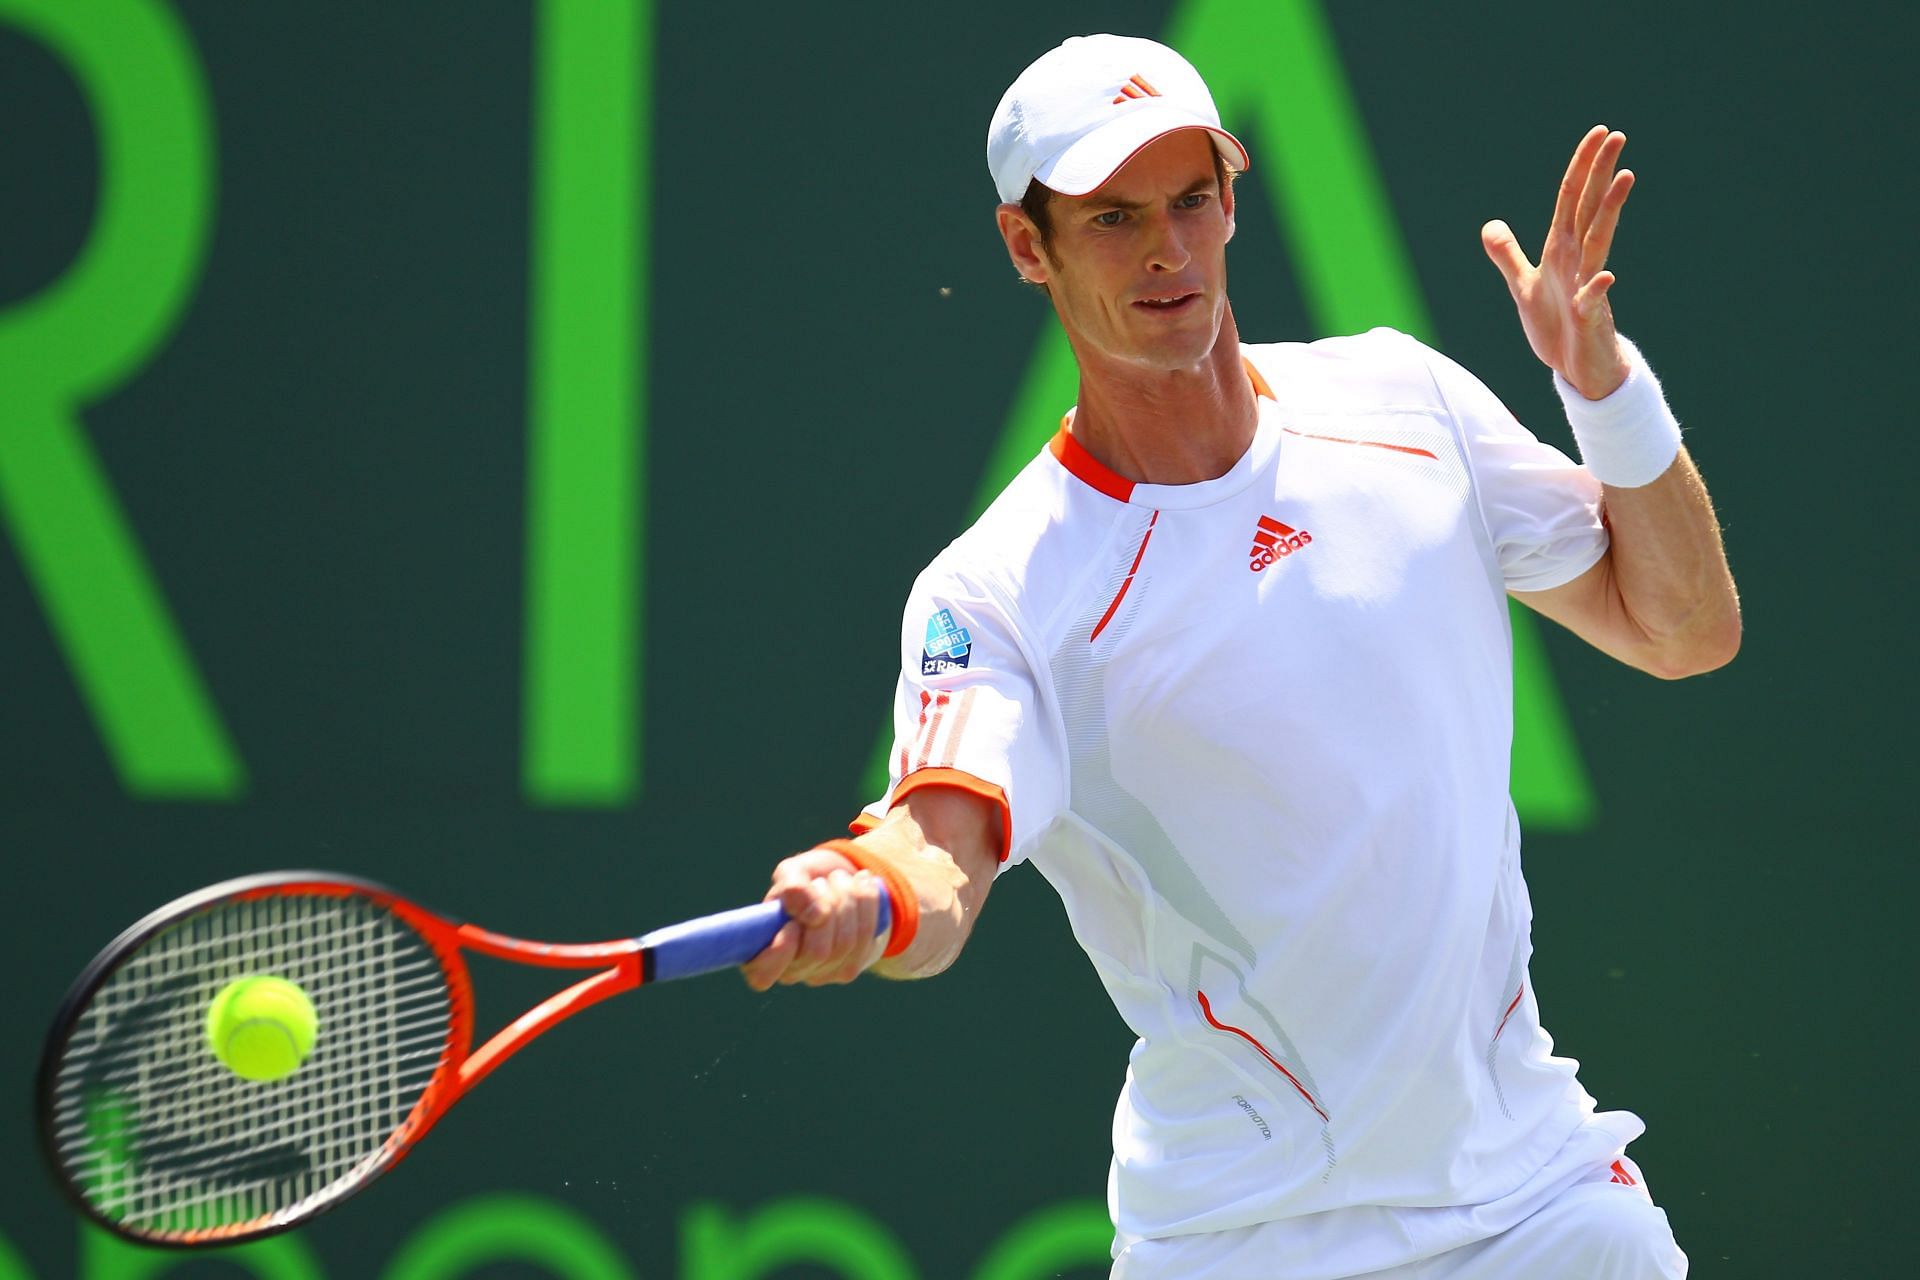 Andy Murray received a walkover from Rafael Nadal in the 2012 Miami semifinal.